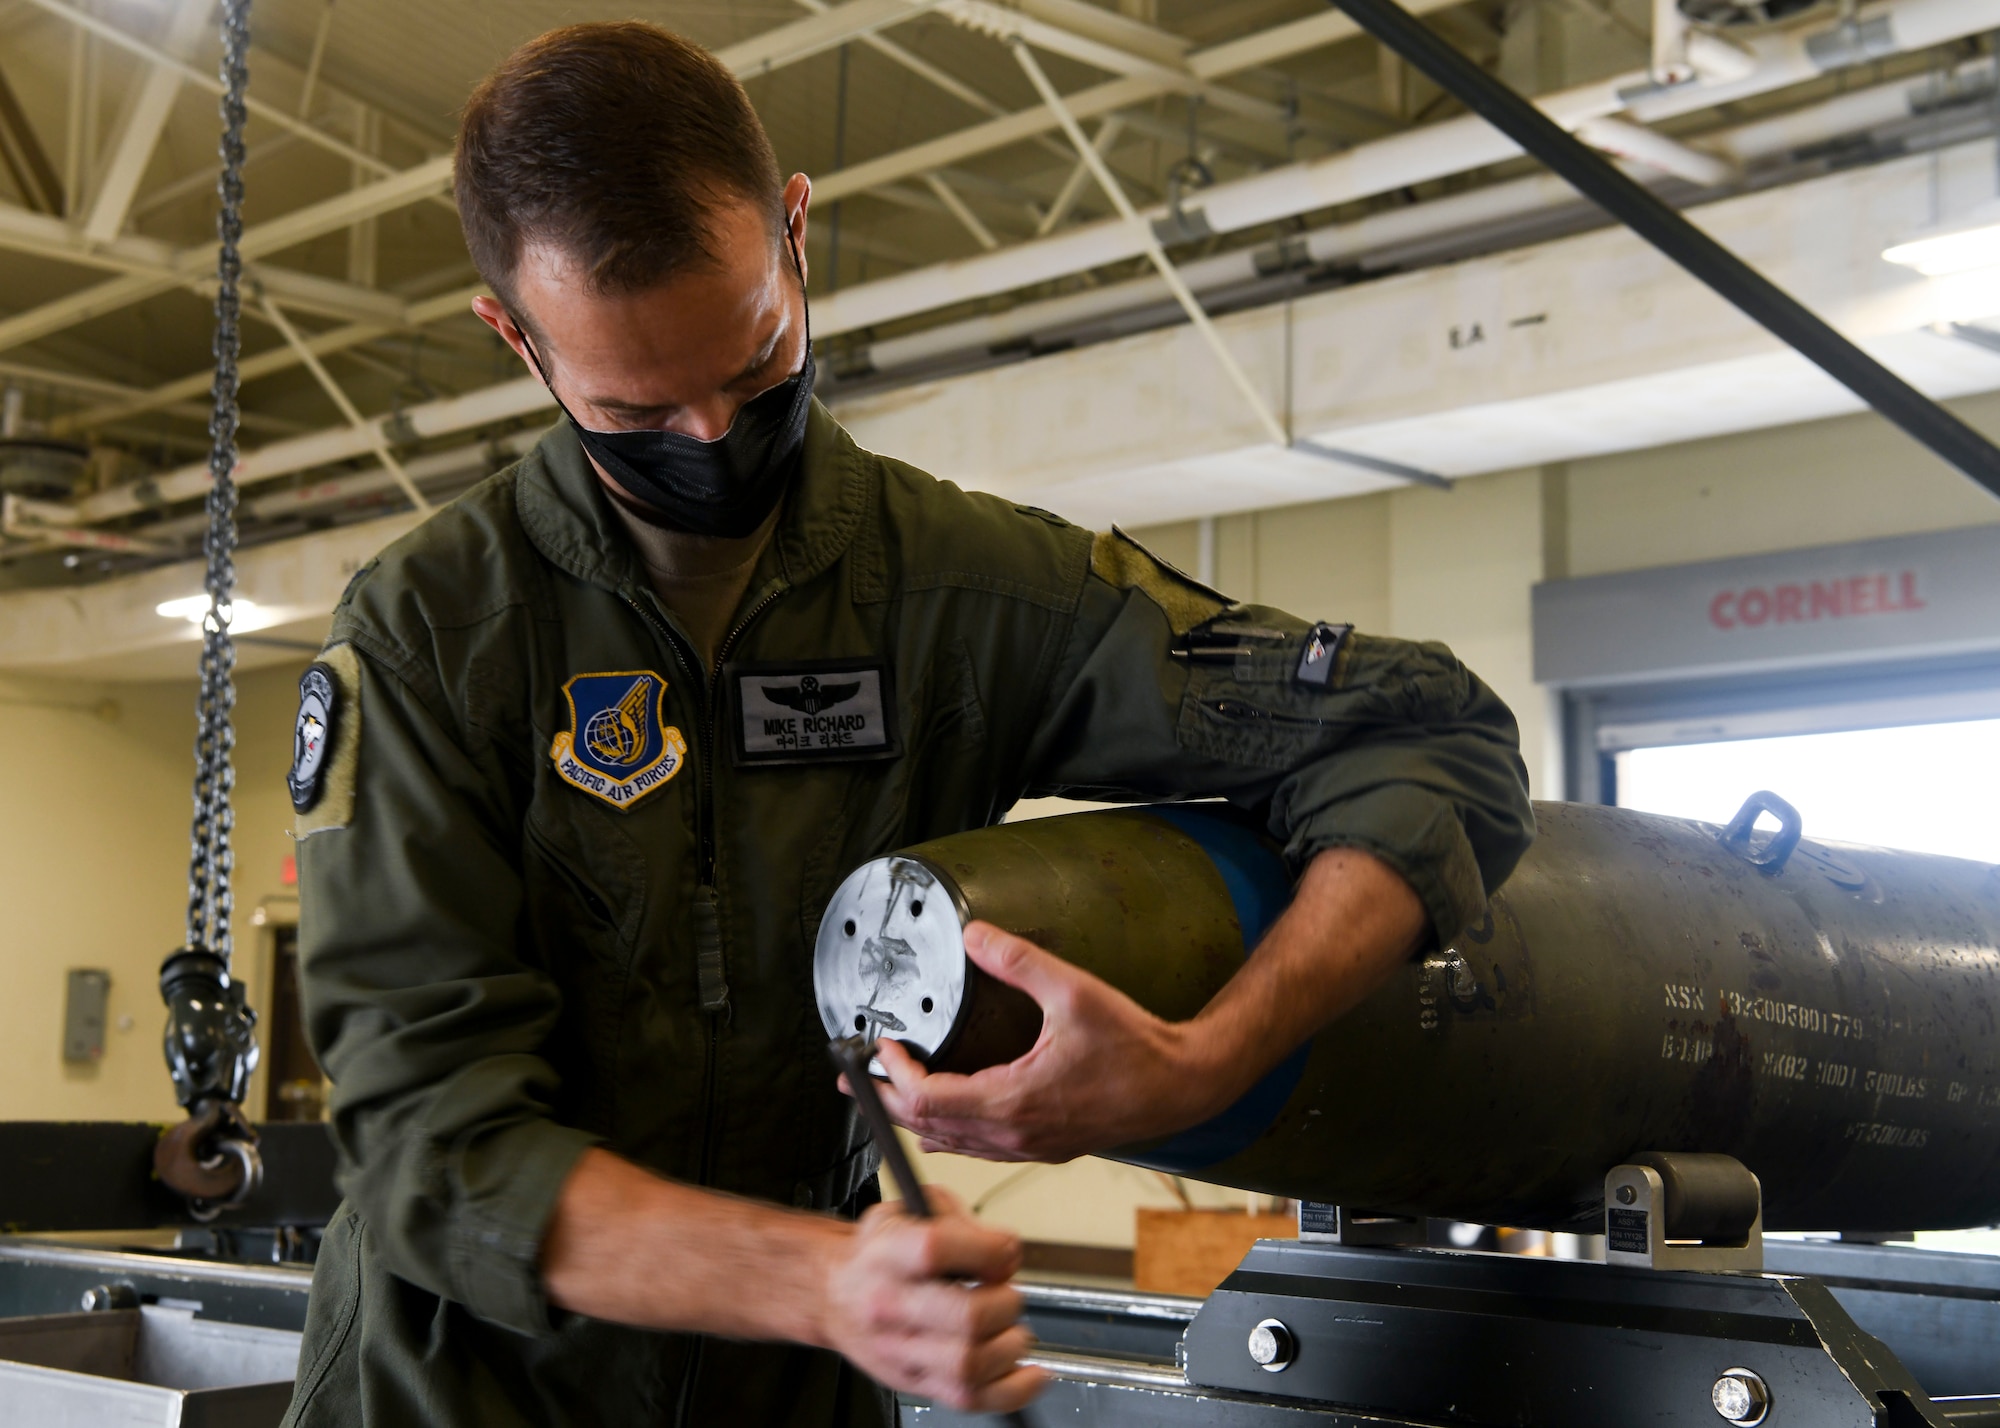 A commander works on a munition.